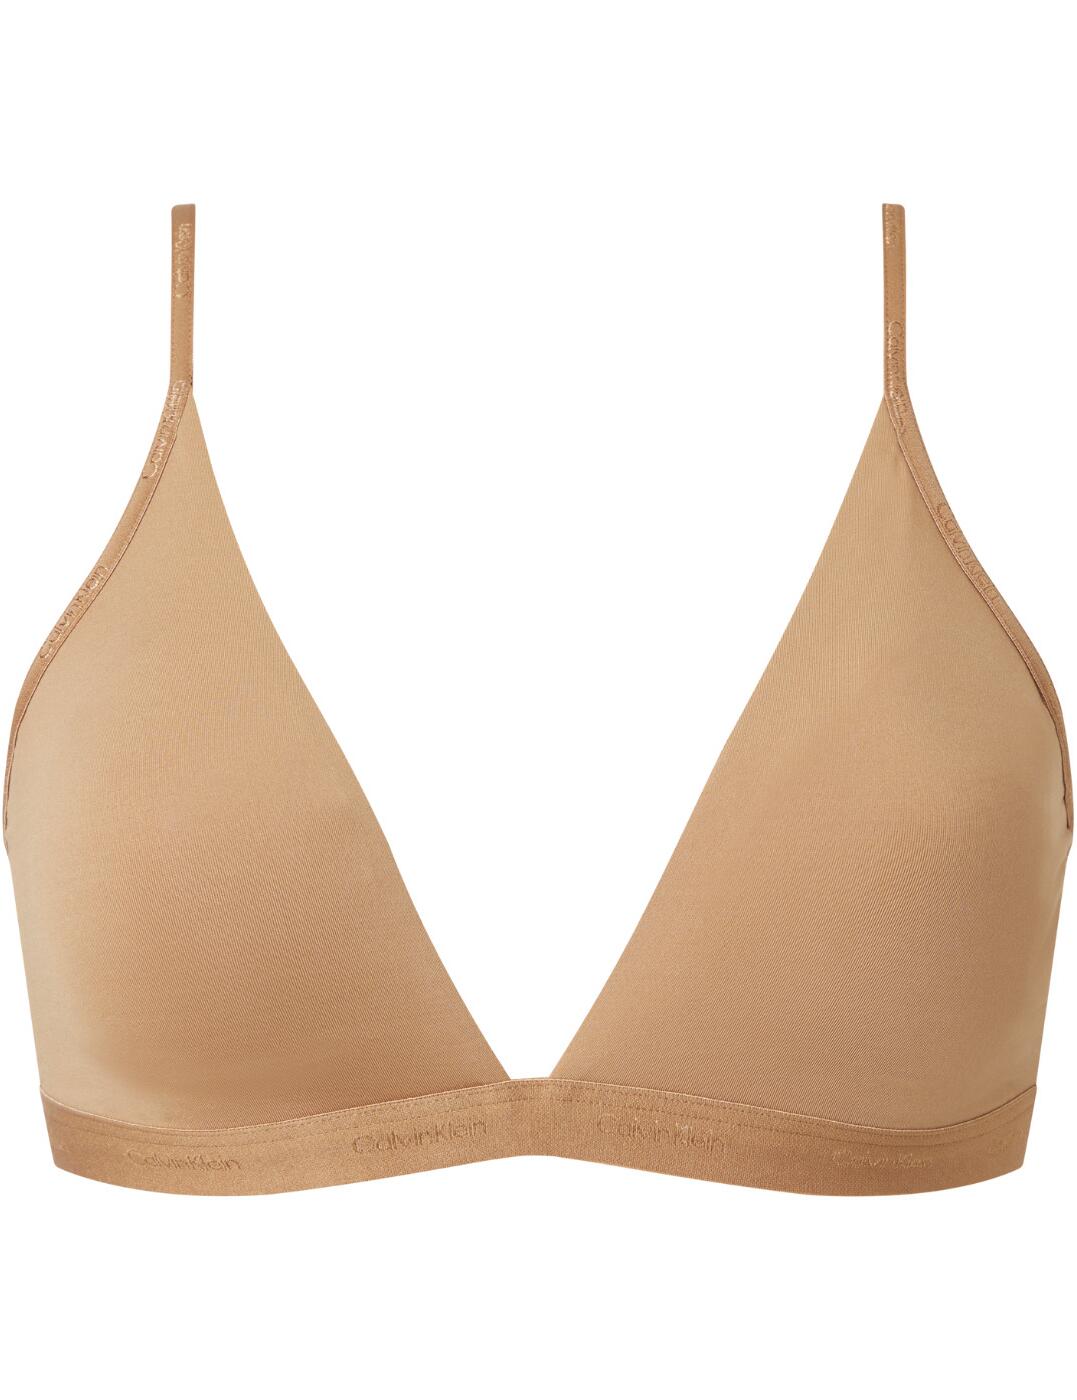 000QF6758E Calvin Klein Form To Body Natural Lightly Lined Triangle Bra -  000QF6758E Sandalwood